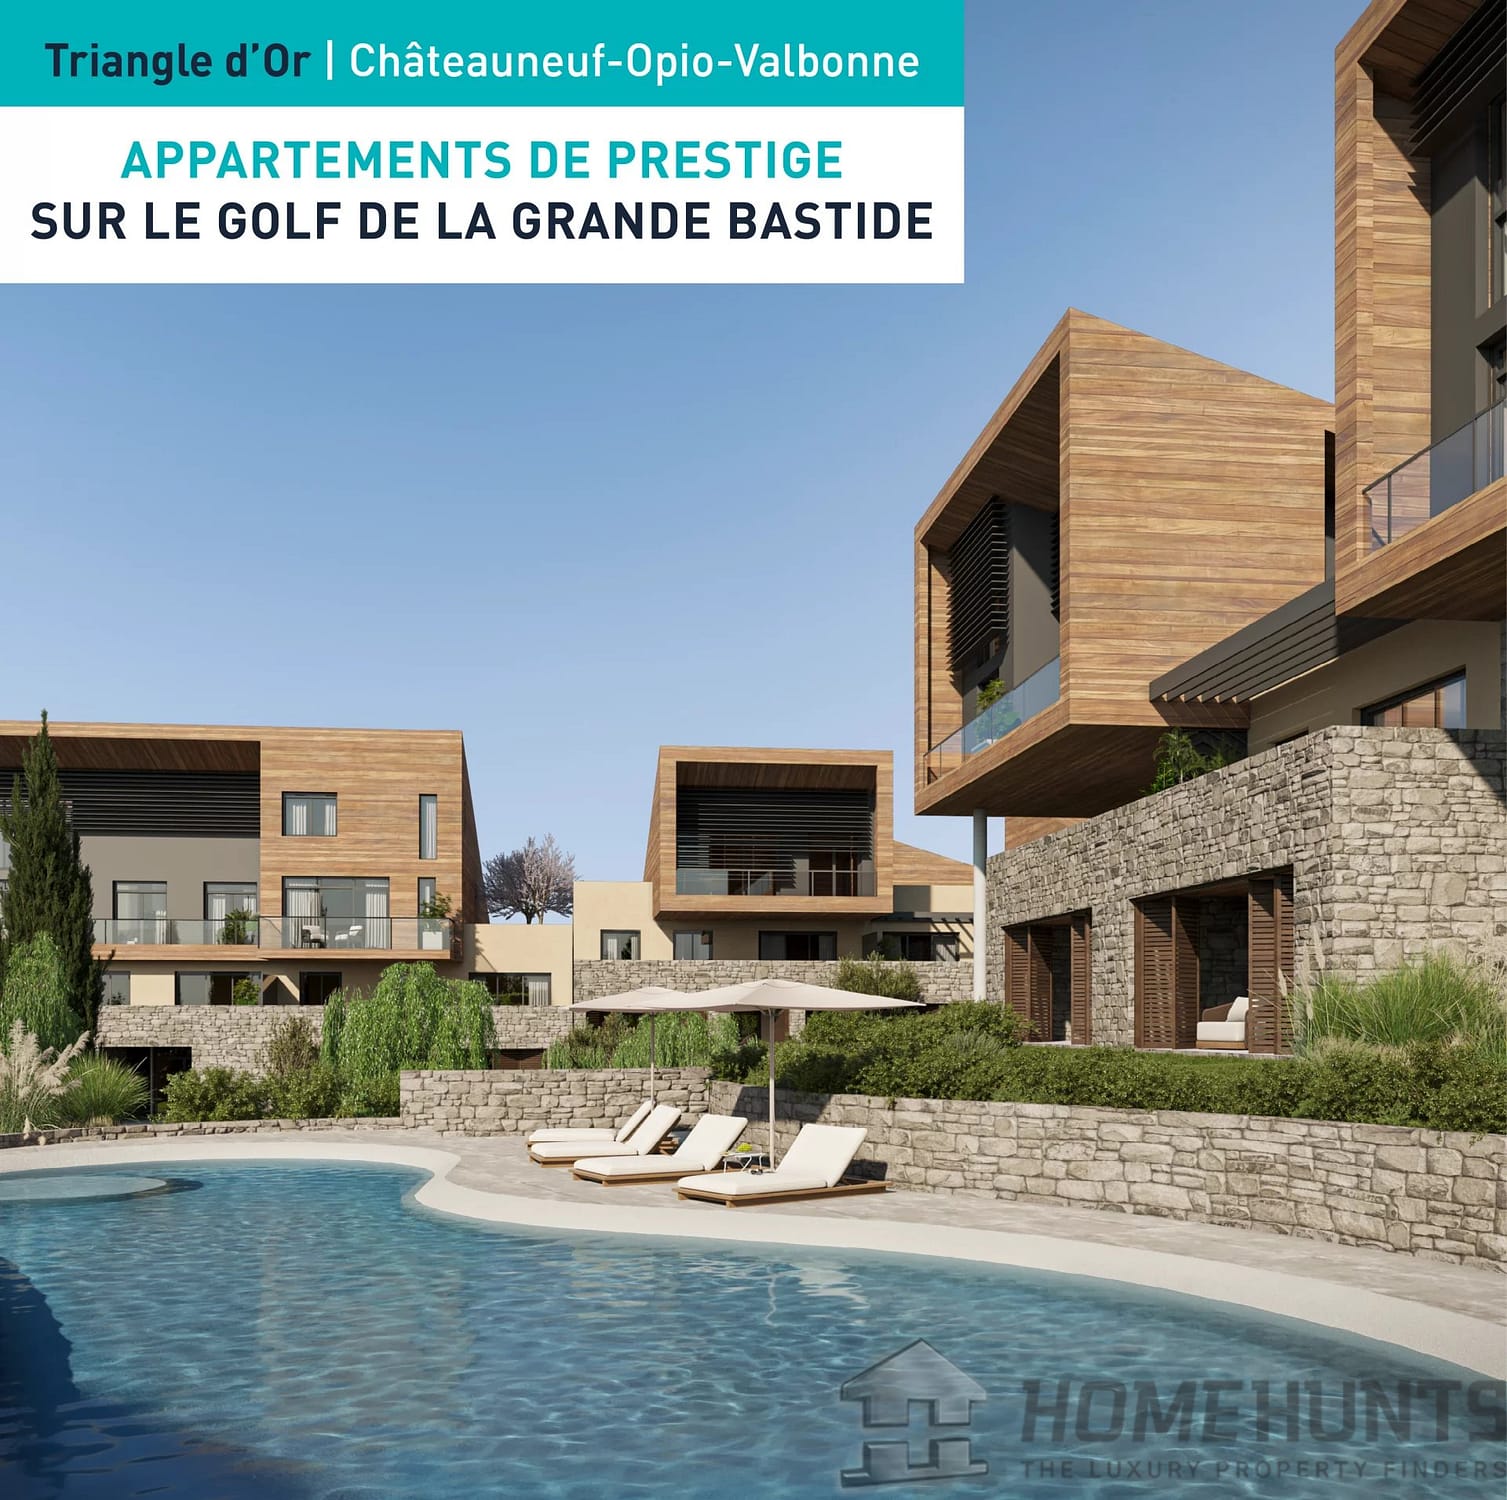 Apartment For Sale in Chateauneuf Grasse 5